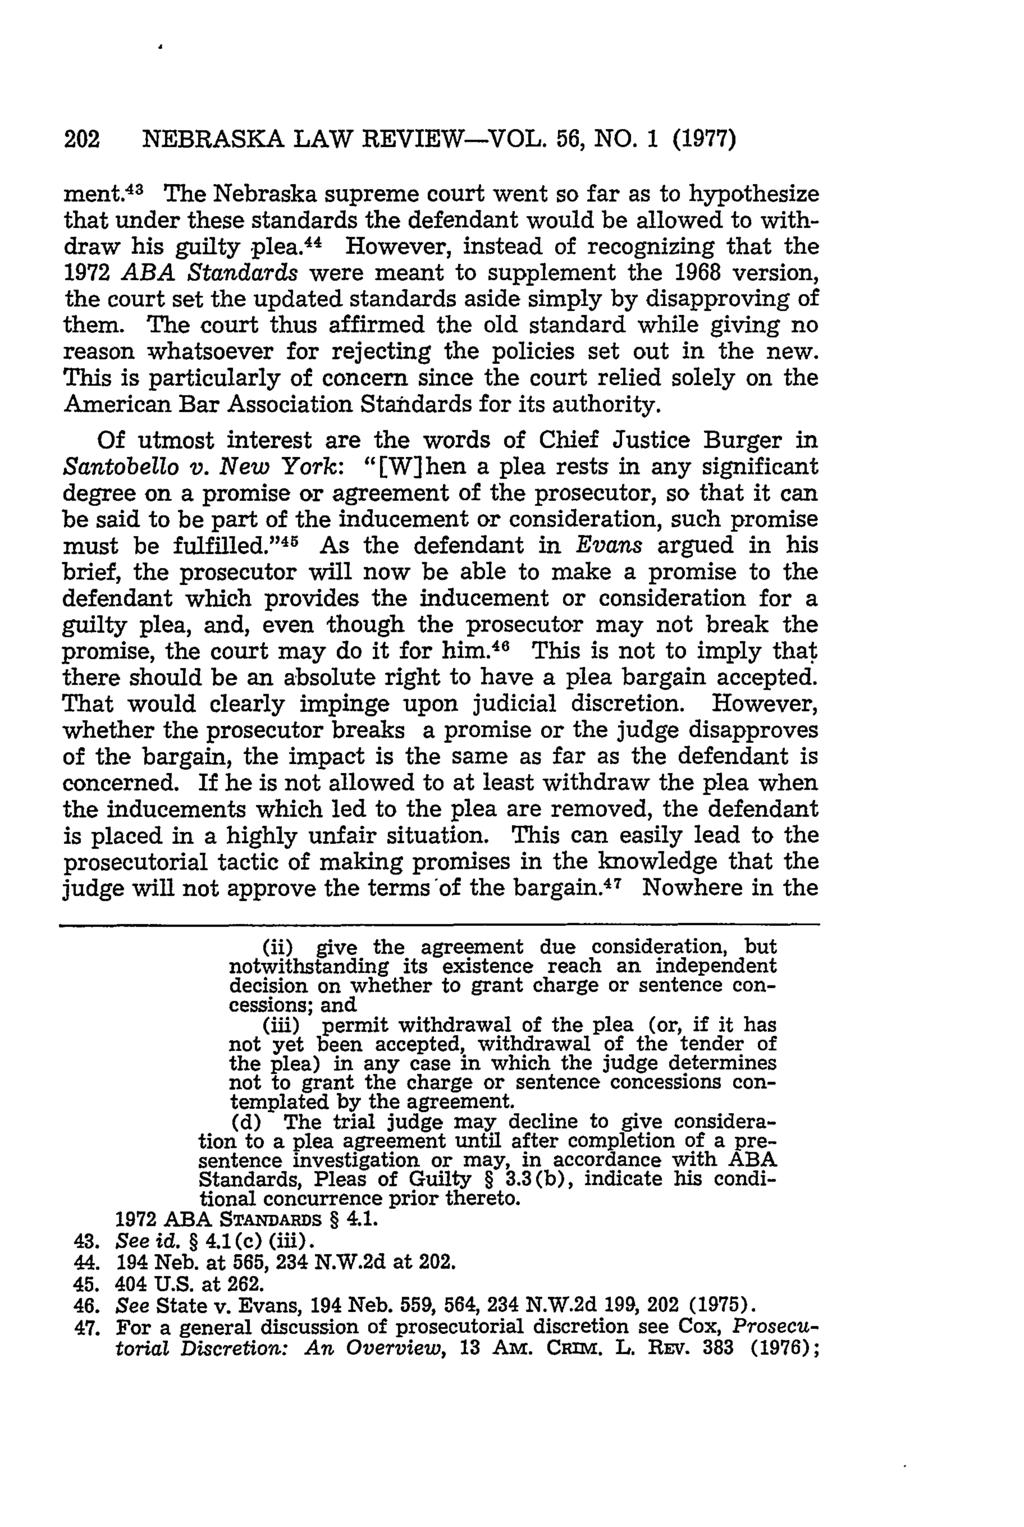 202 NEBRASKA LAW REVIEW-VOL. 56, NO. 1 (1977) ment. 43 The Nebraska supreme court went so far as to hypothesize that under these standards the defendant would be allowed to withdraw his guilty plea.